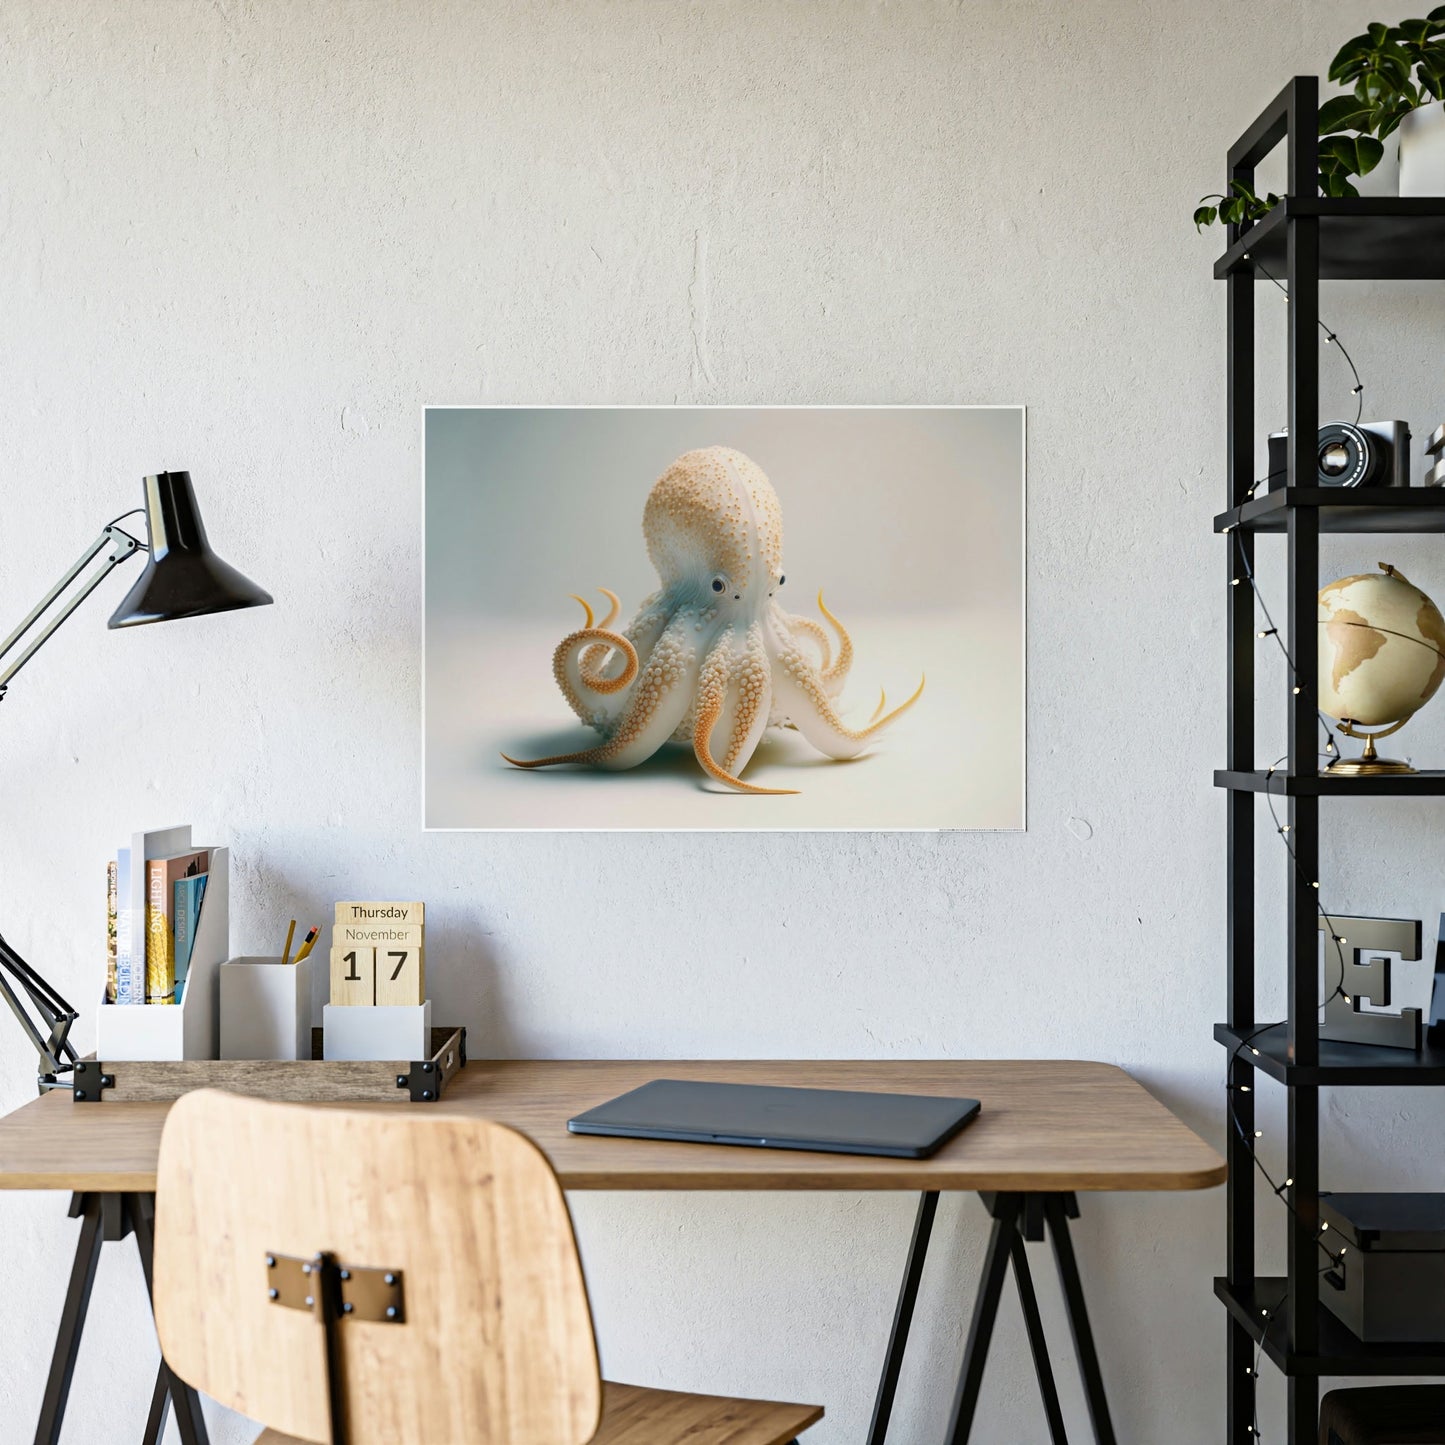 The Wonders of Octopuses: A Detailed and Realistic Canvas